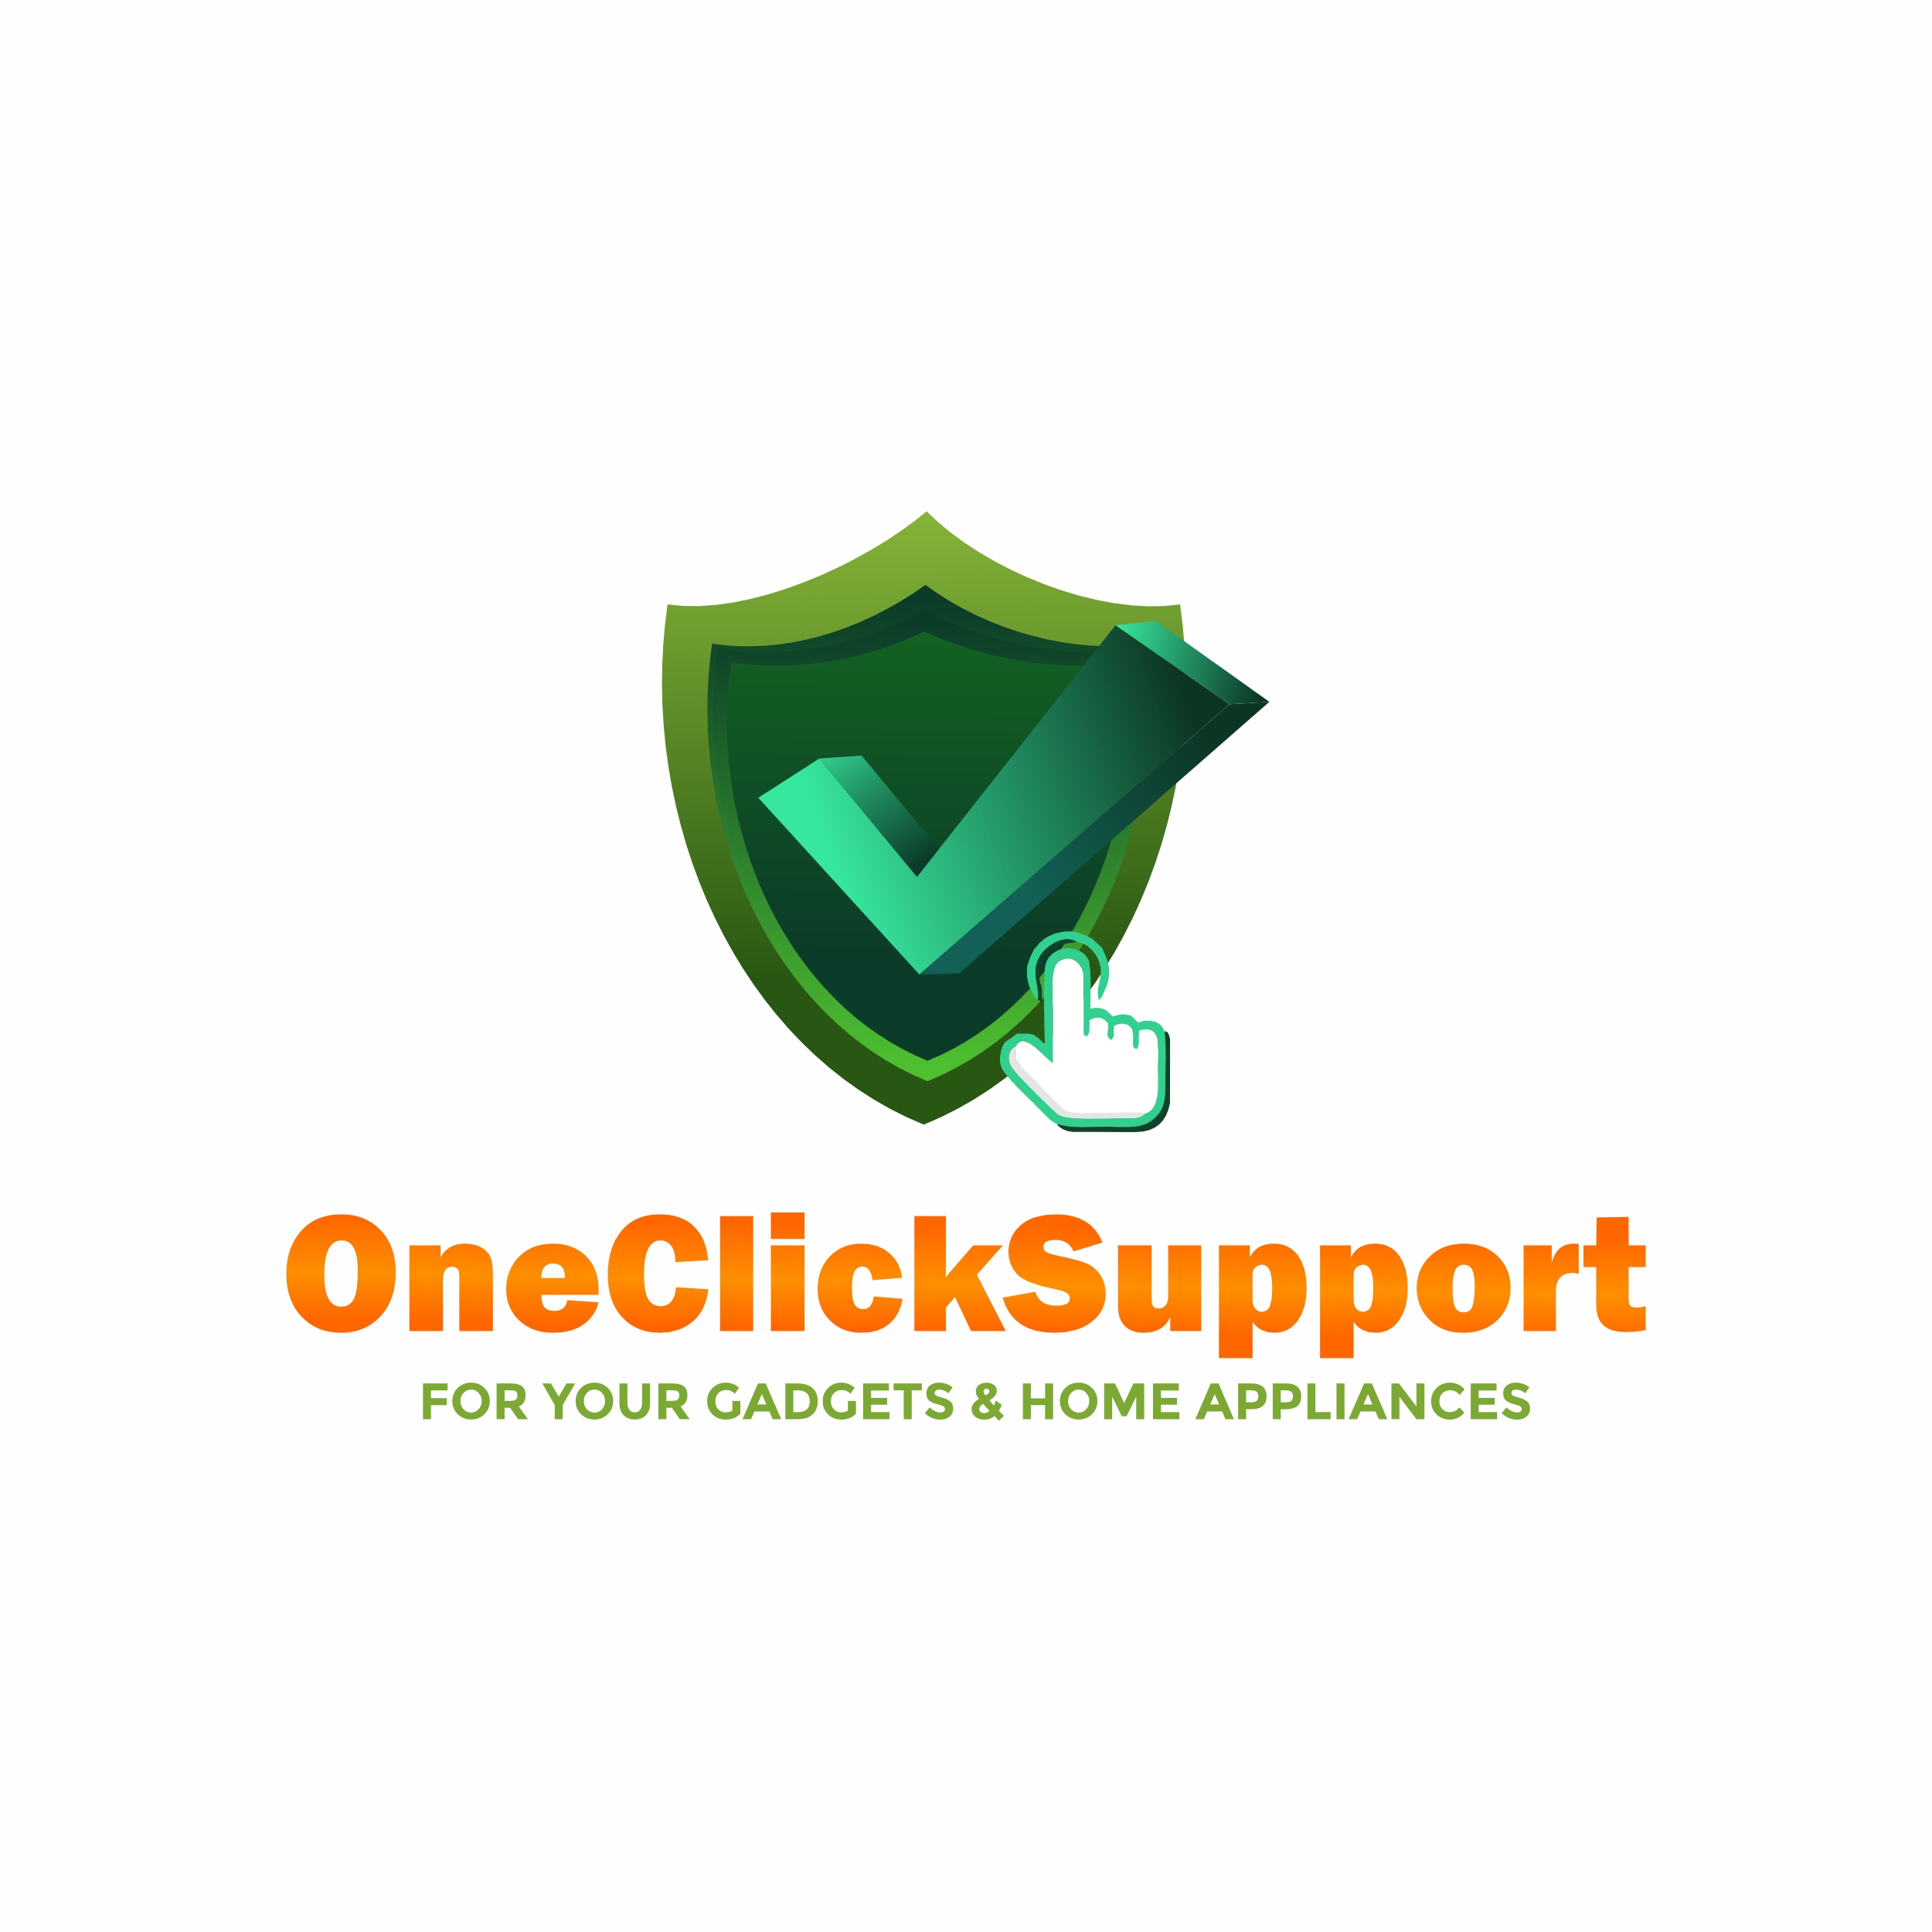 OneClickSupport